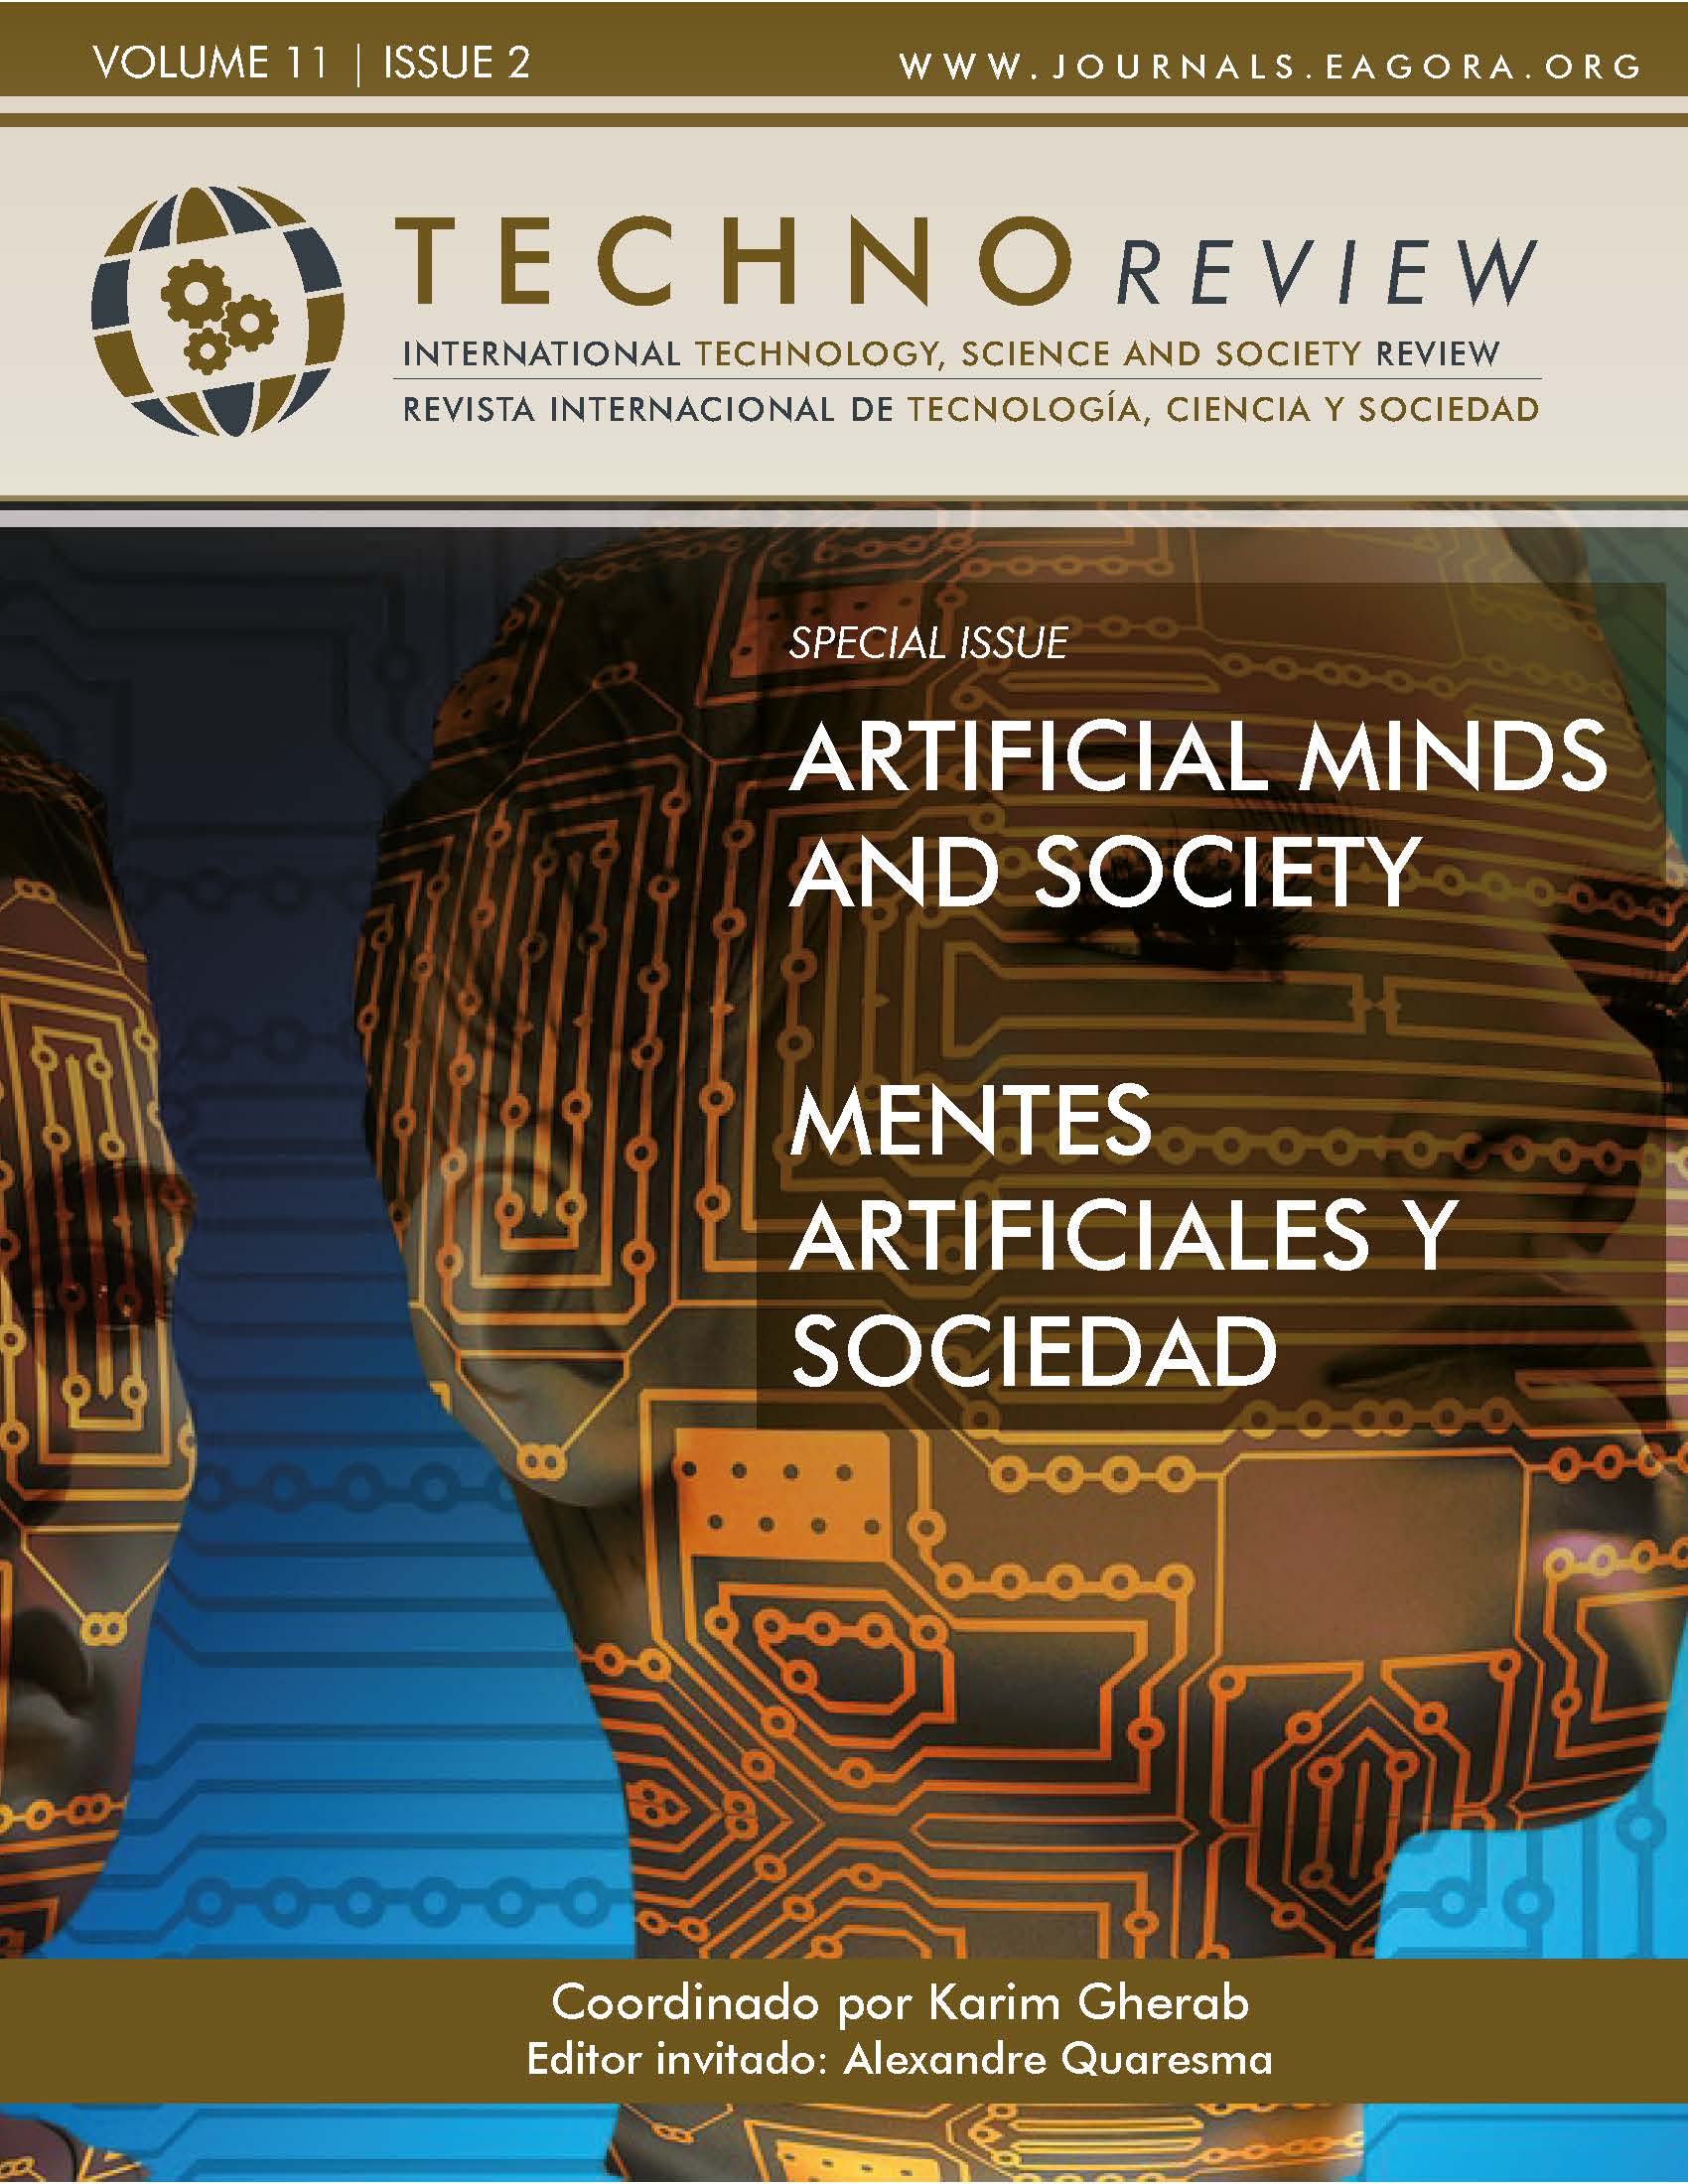 					View Vol. 11 No. 2 (2022): Special Issue "Artificial Minds and Society"
				